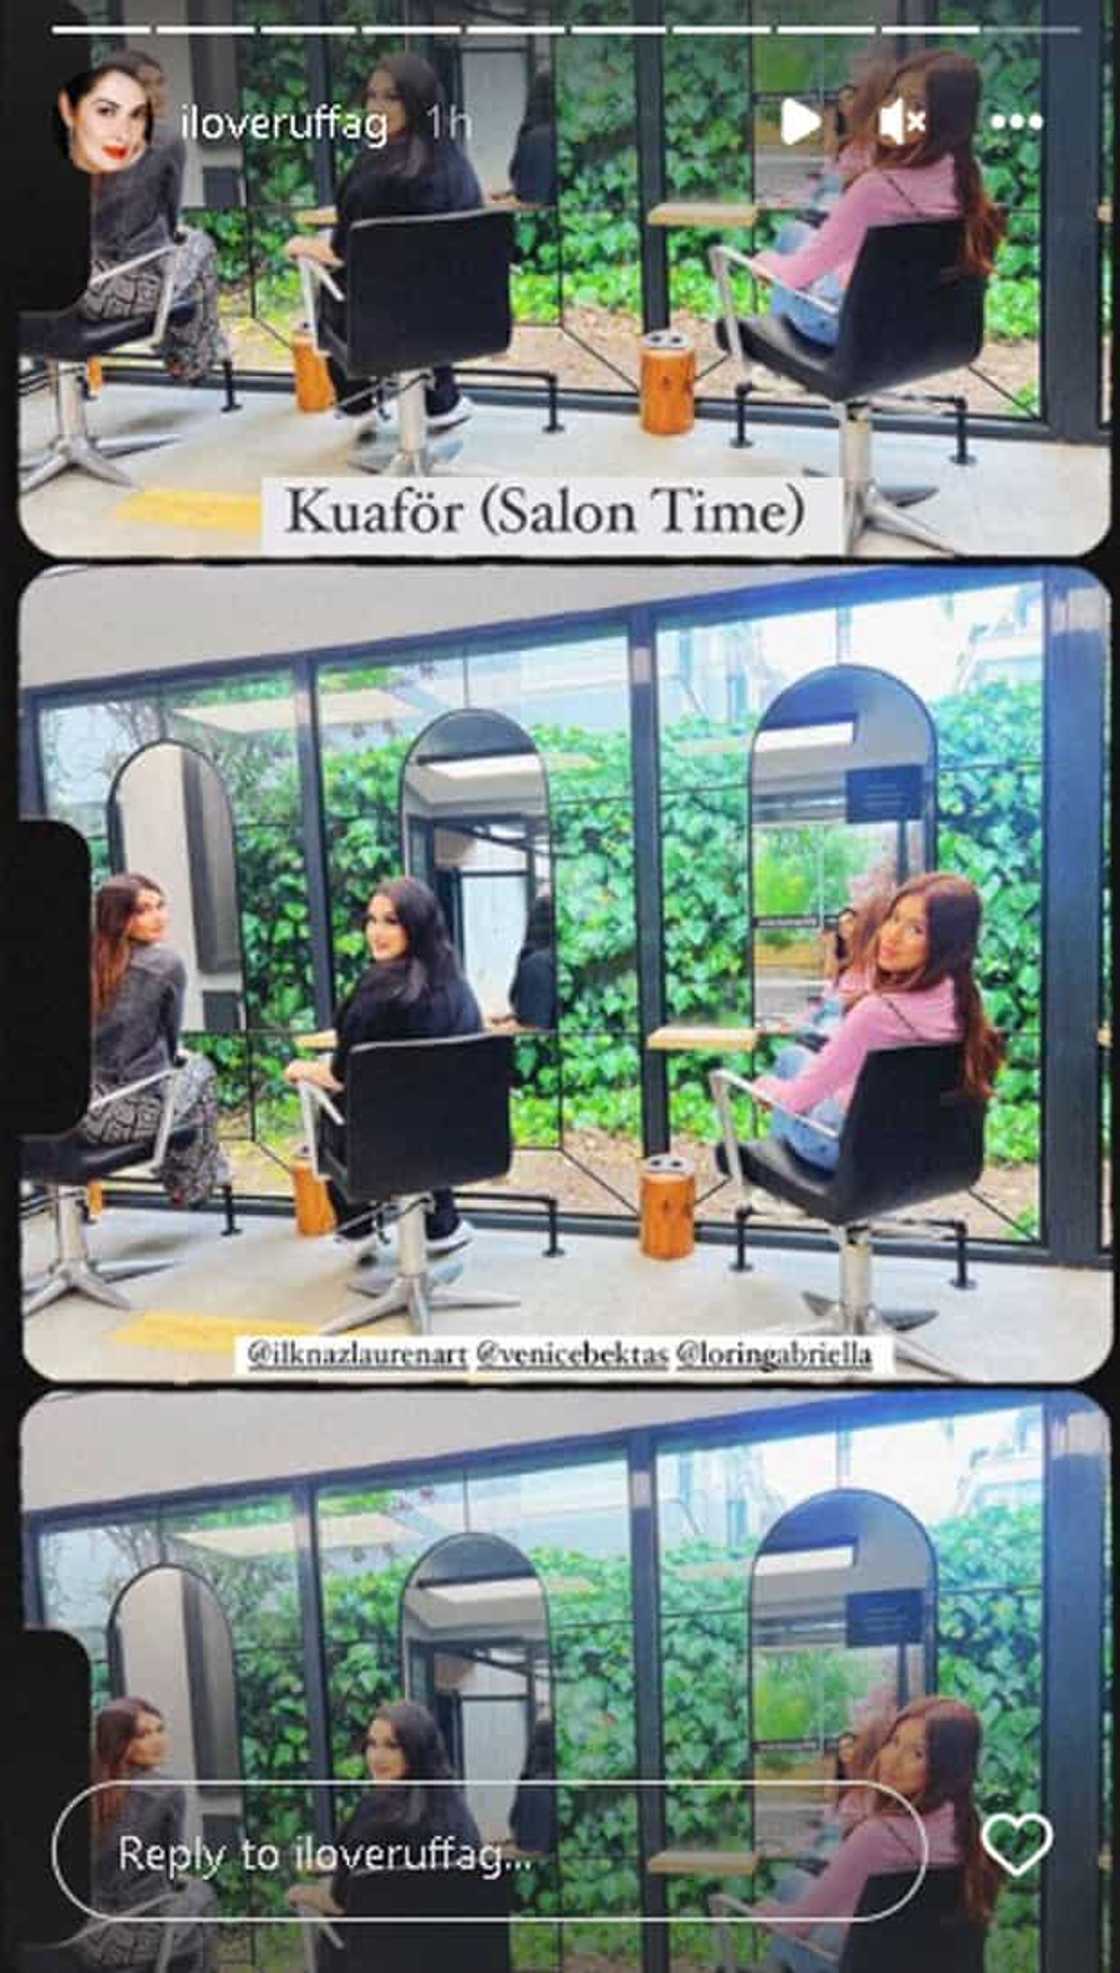 Ruffa Gutierrez's daughters bond with sister in Istanbul at the salon